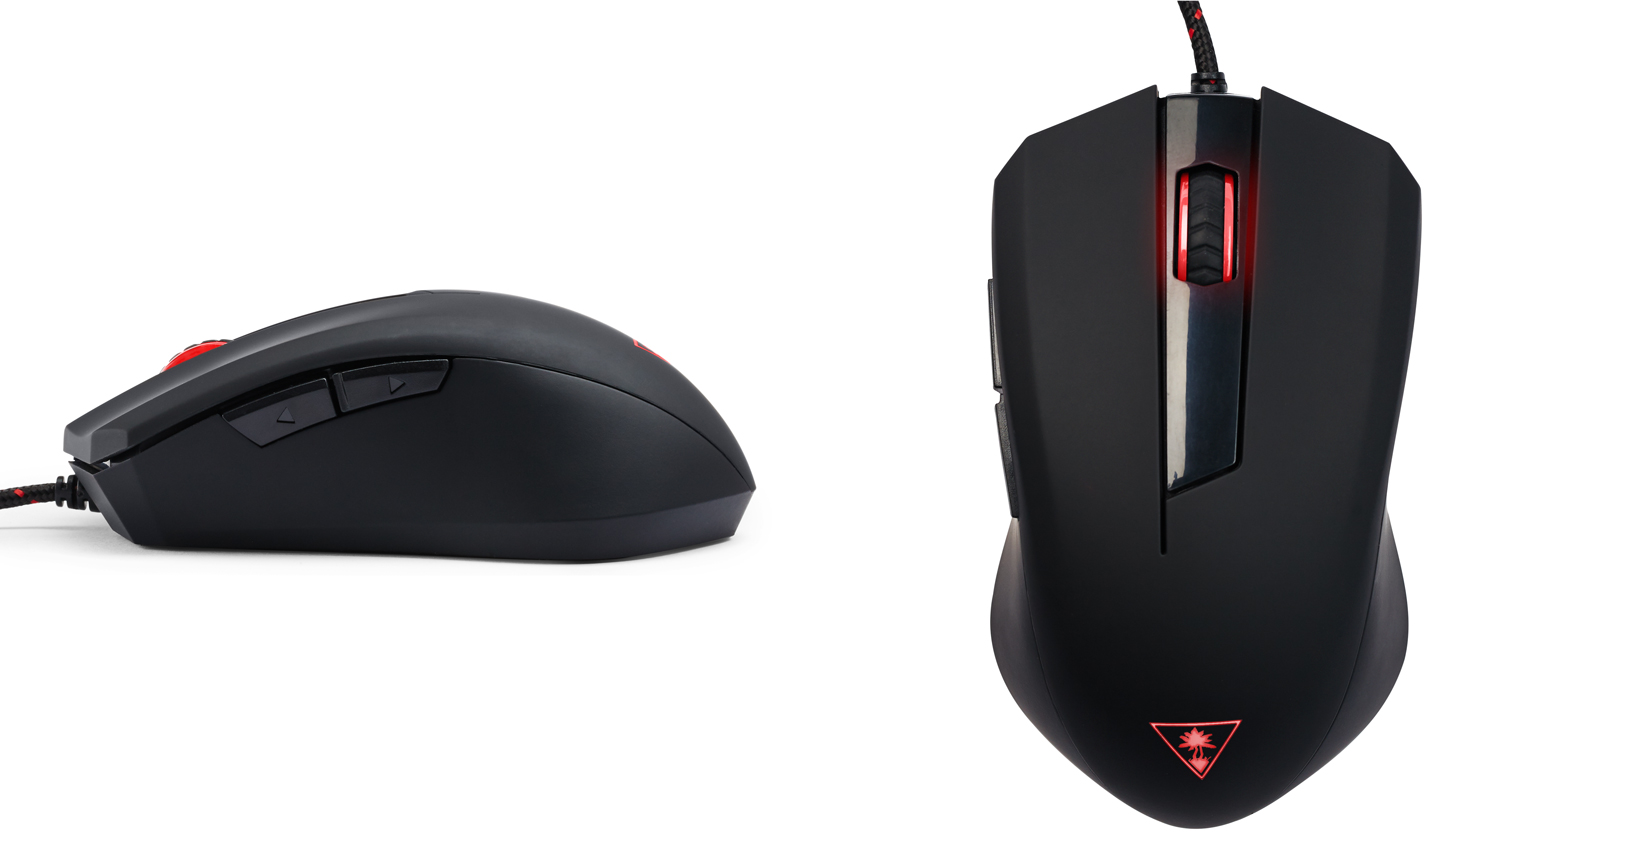 Turtle Beach GRIP 300 Gaming Mouse Kit Review